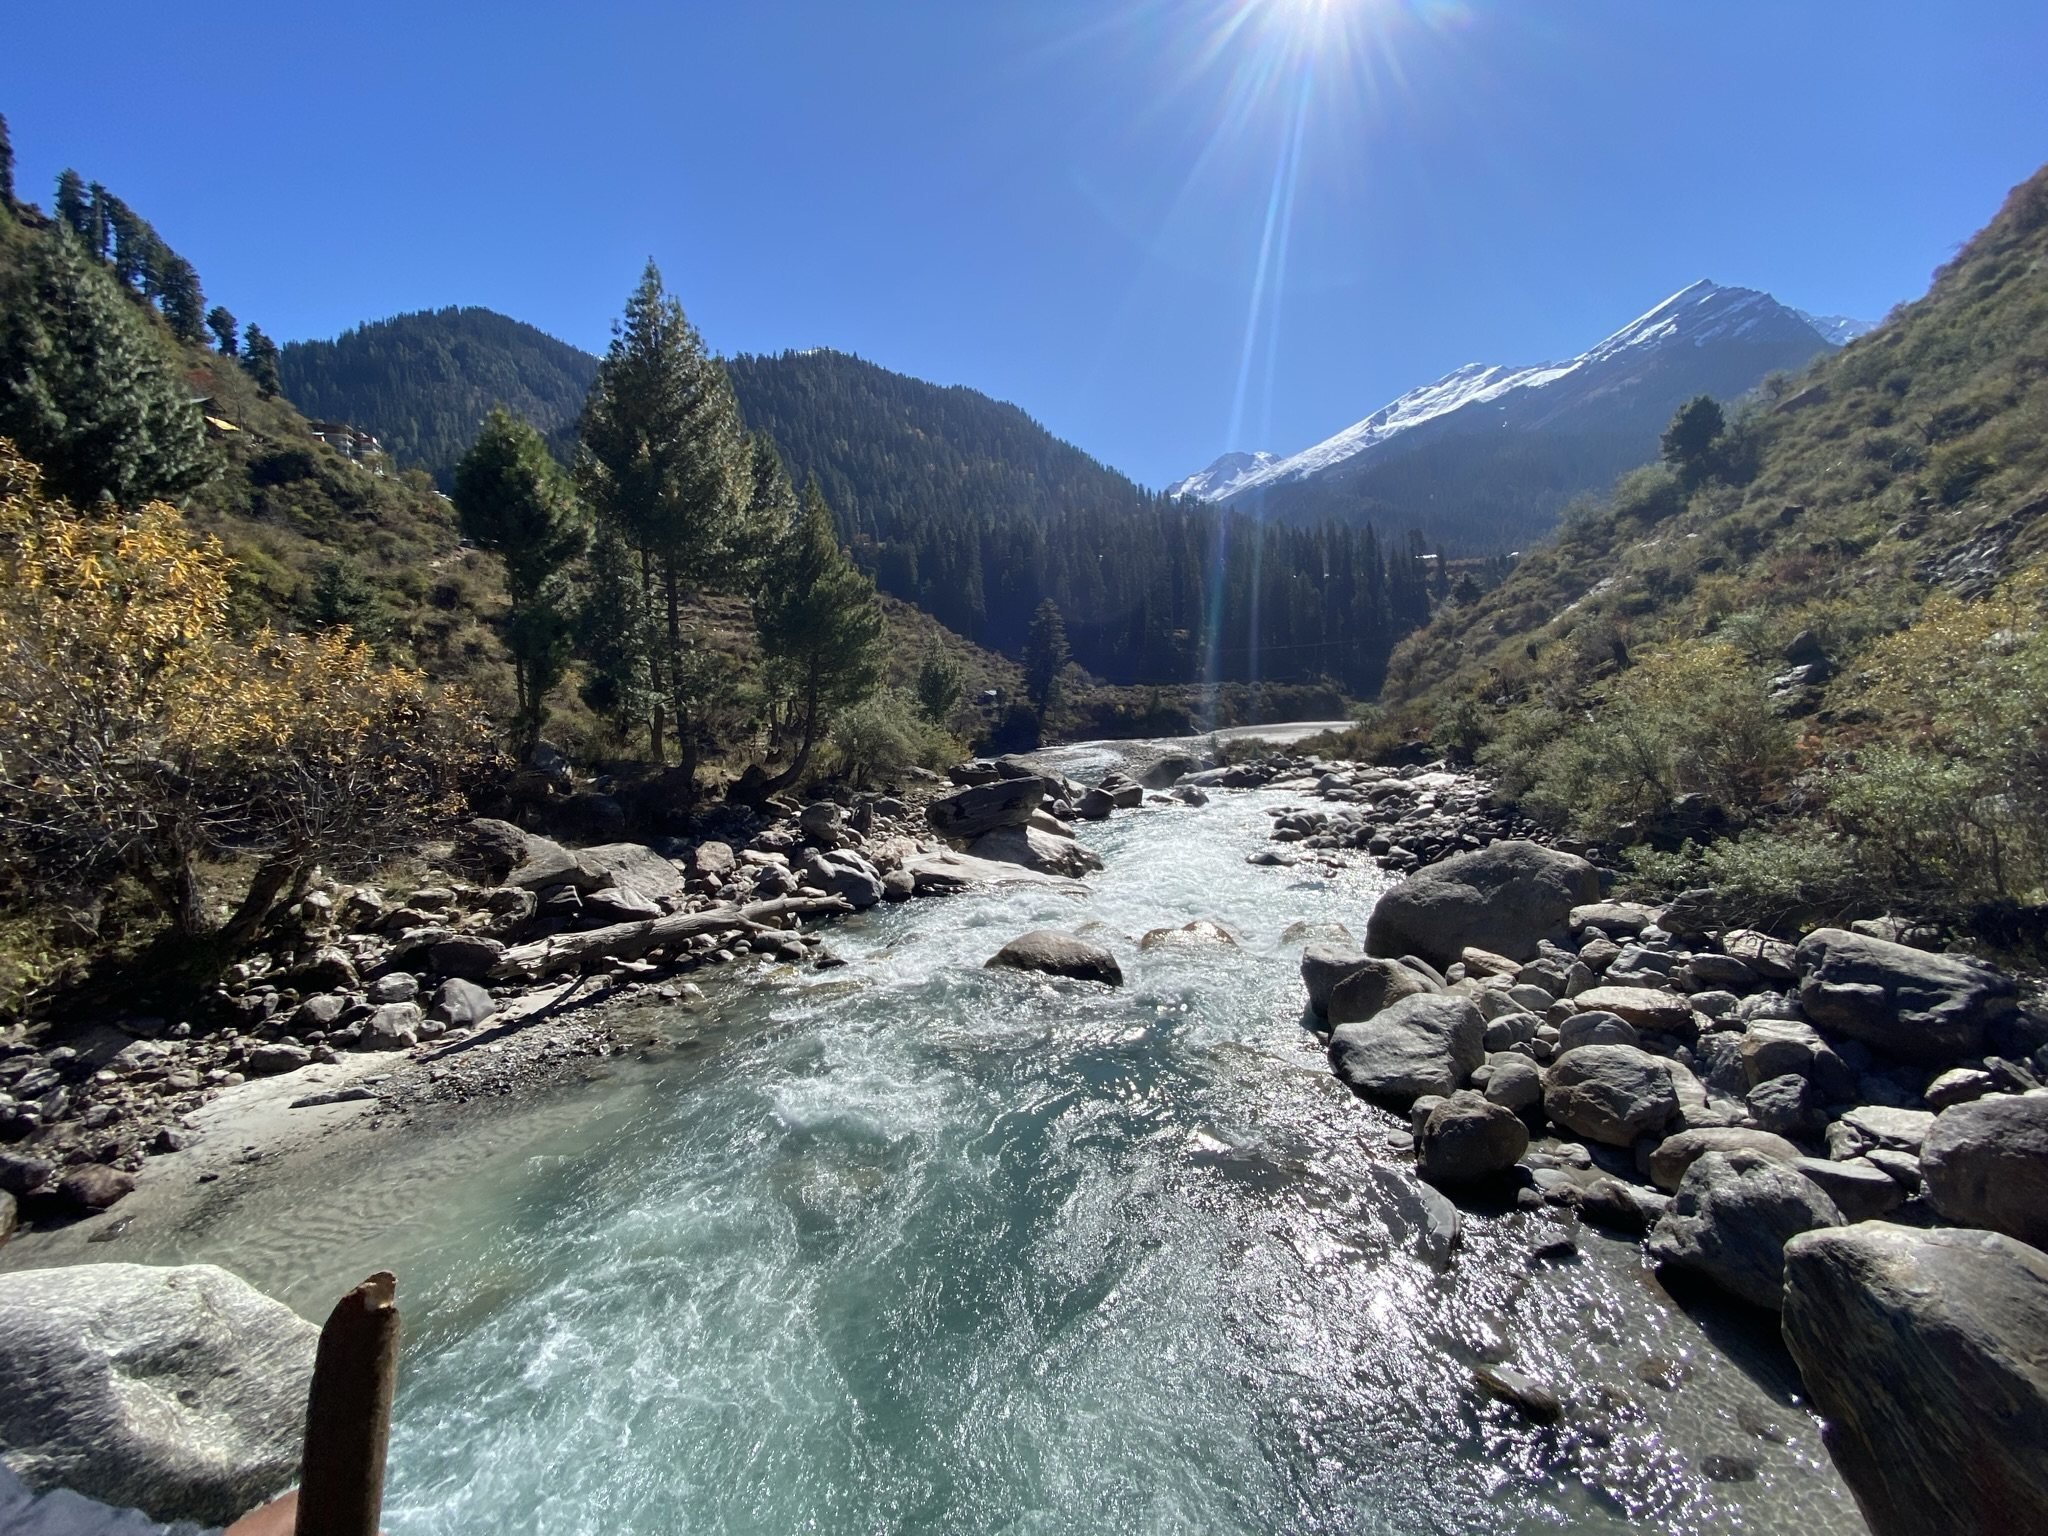 The Parvati river, seen near the village of Malana, best-known for its export - the Malana Cream strand of hashish. Photo: Kunal Purohit